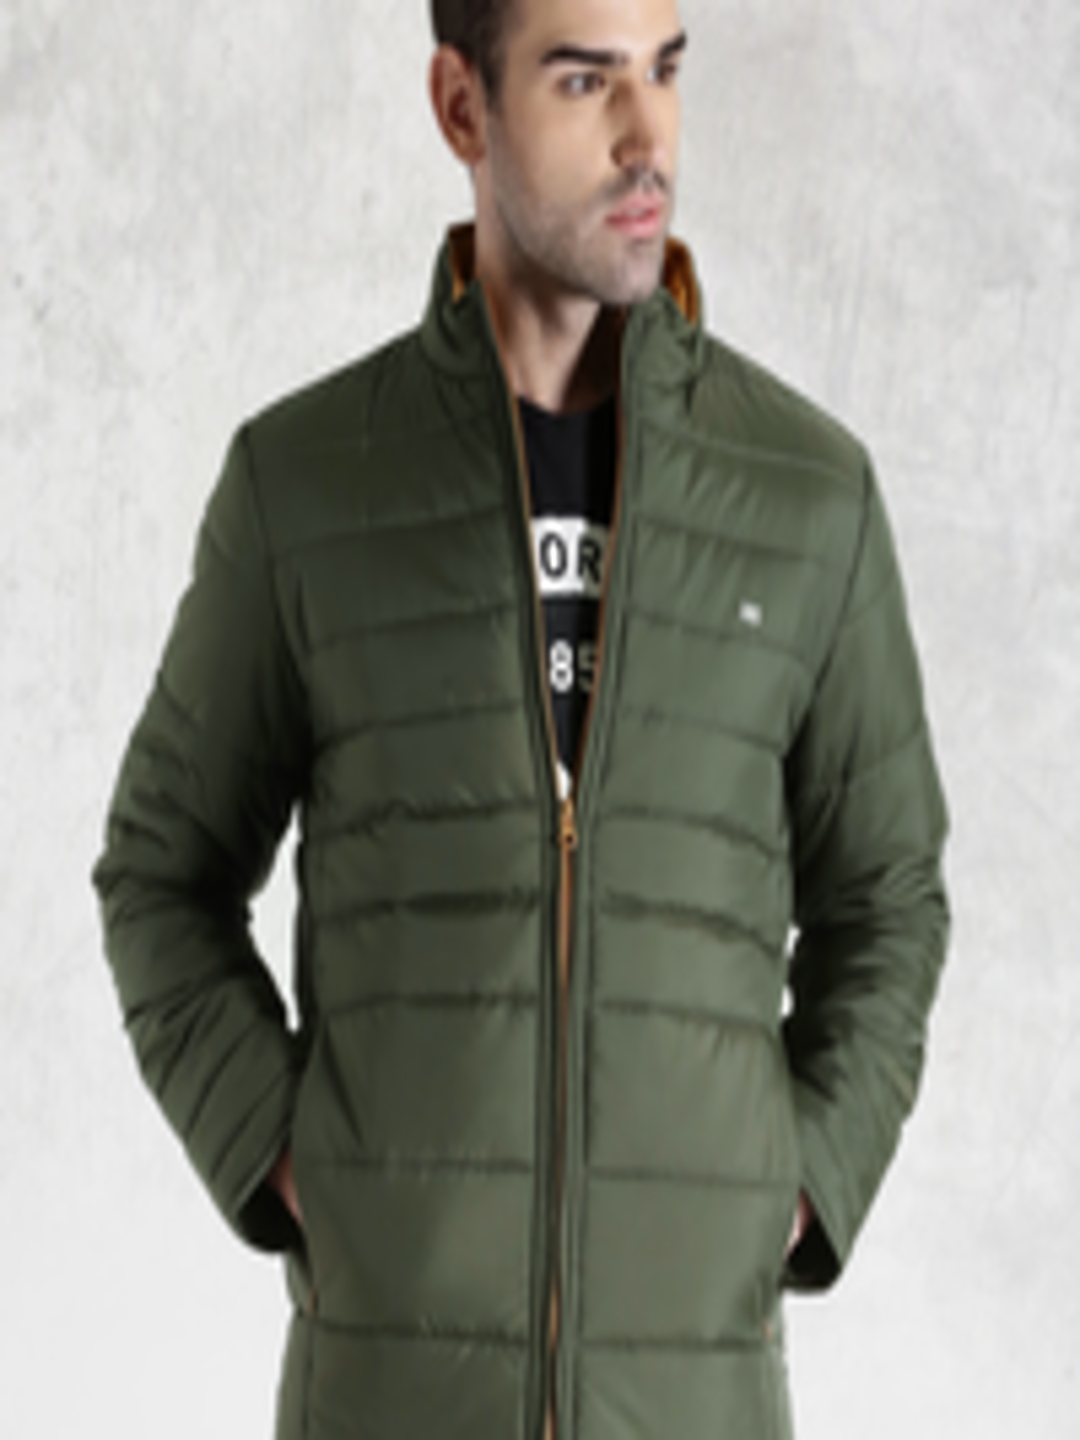 Buy Roadster Olive Green Quilted Jacket - Jackets for Men 1340680 | Myntra